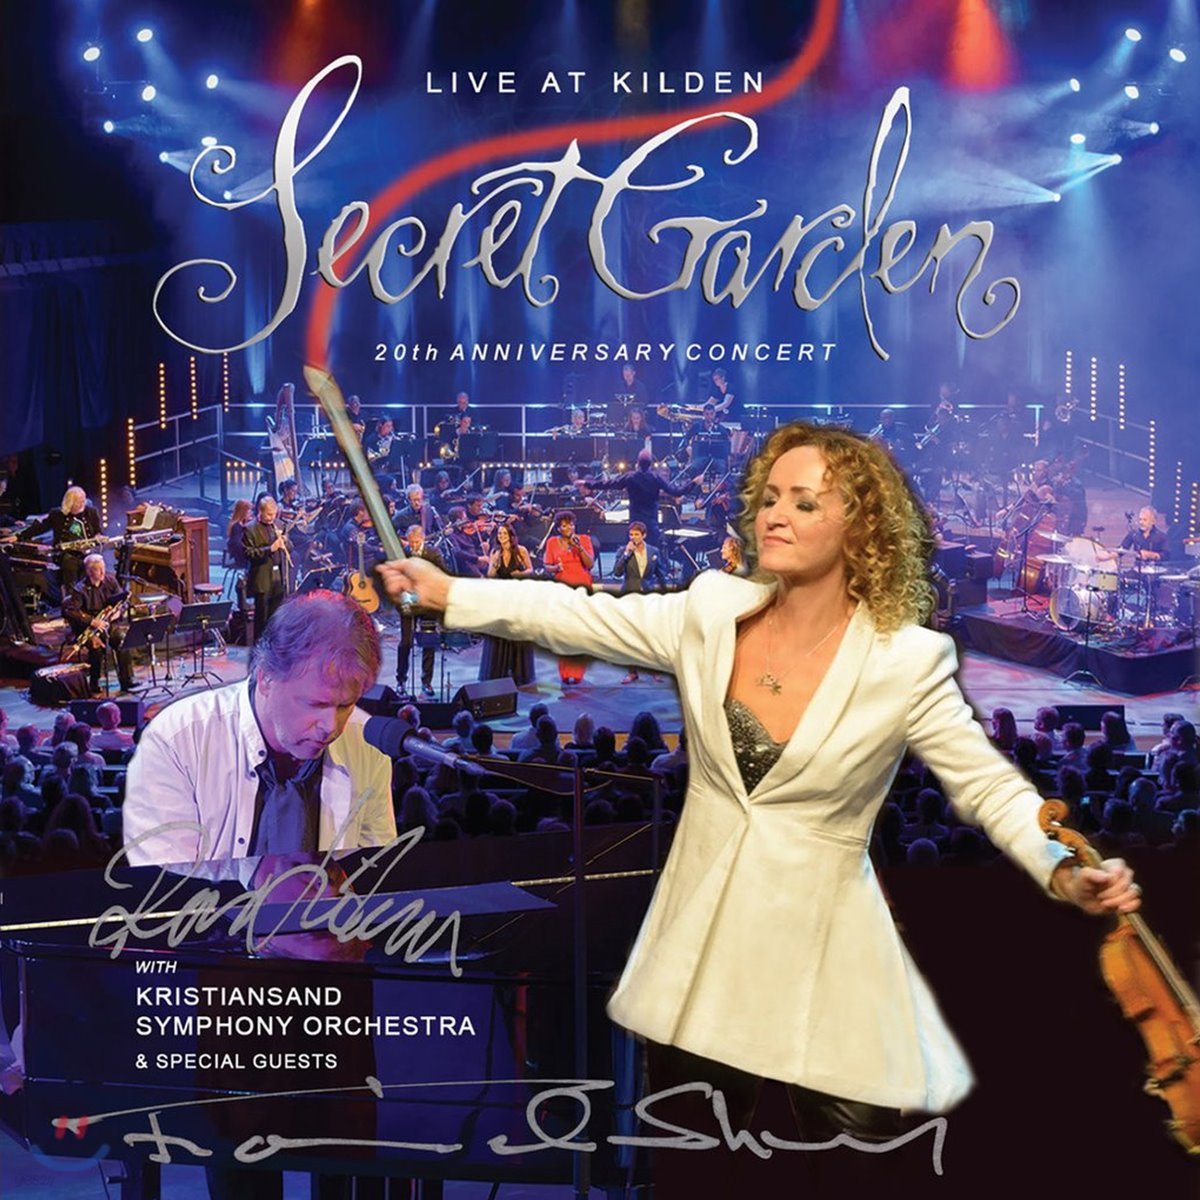 Secret Garden (시크릿 가든) - Live at Kilden: 20th Anniversay Concert (Germany, UK, Aus/NZ and Korea excluded)